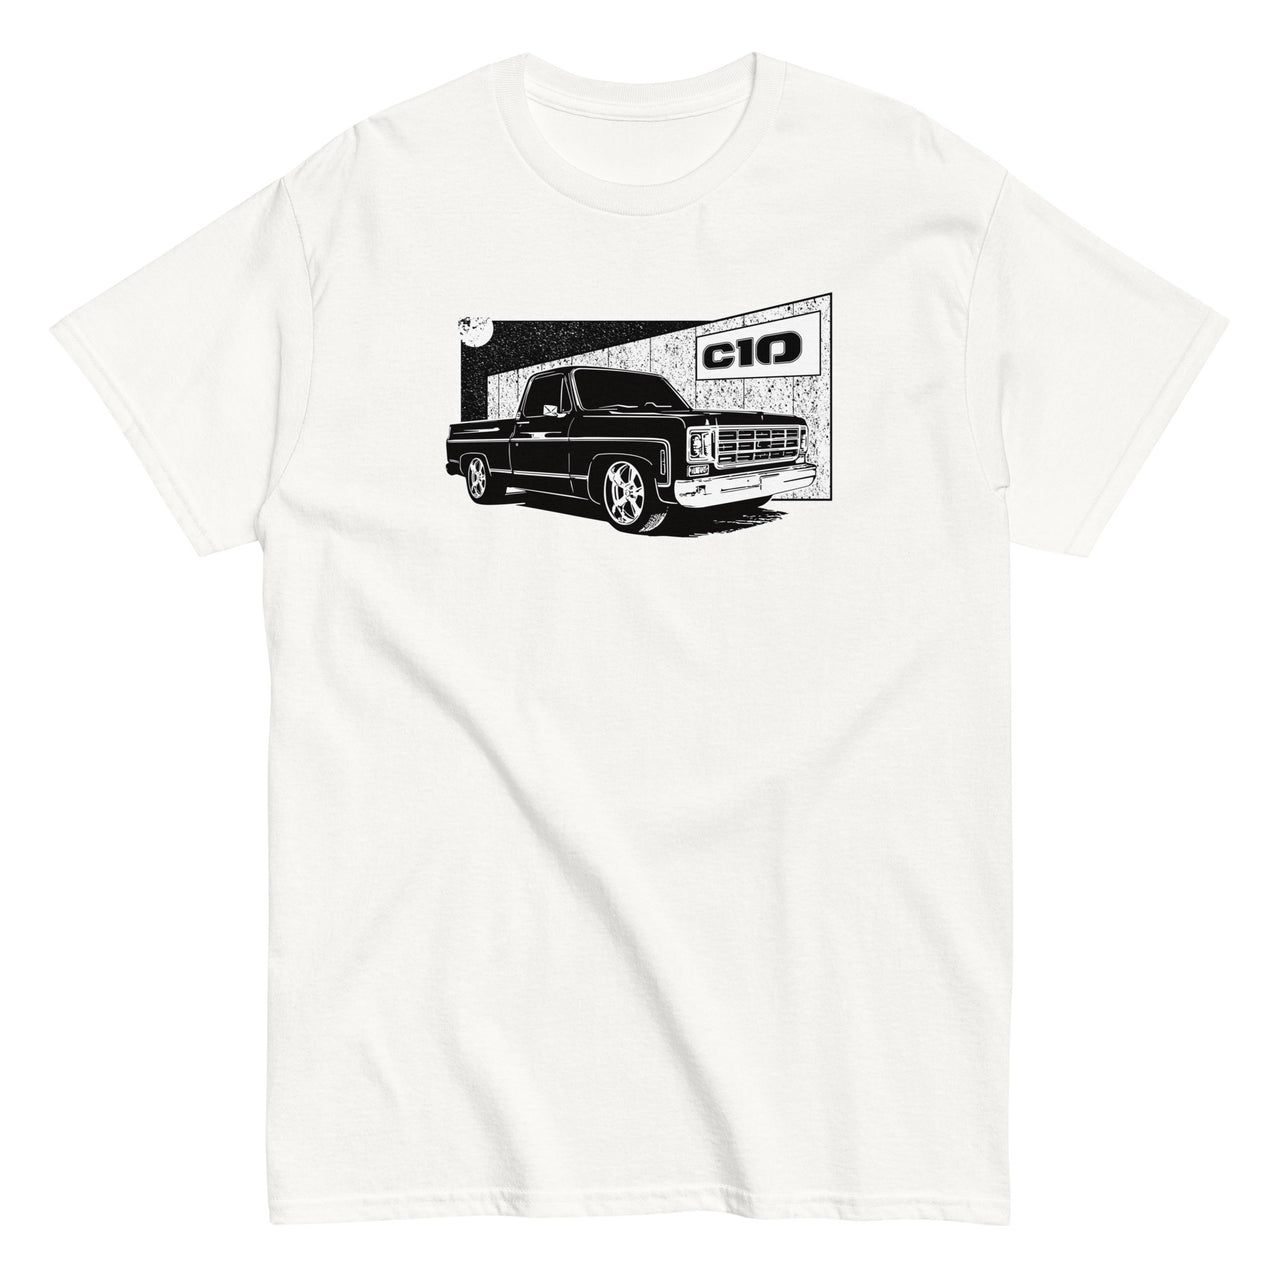 Square Body T-Shirt With Round Eye 70s C10